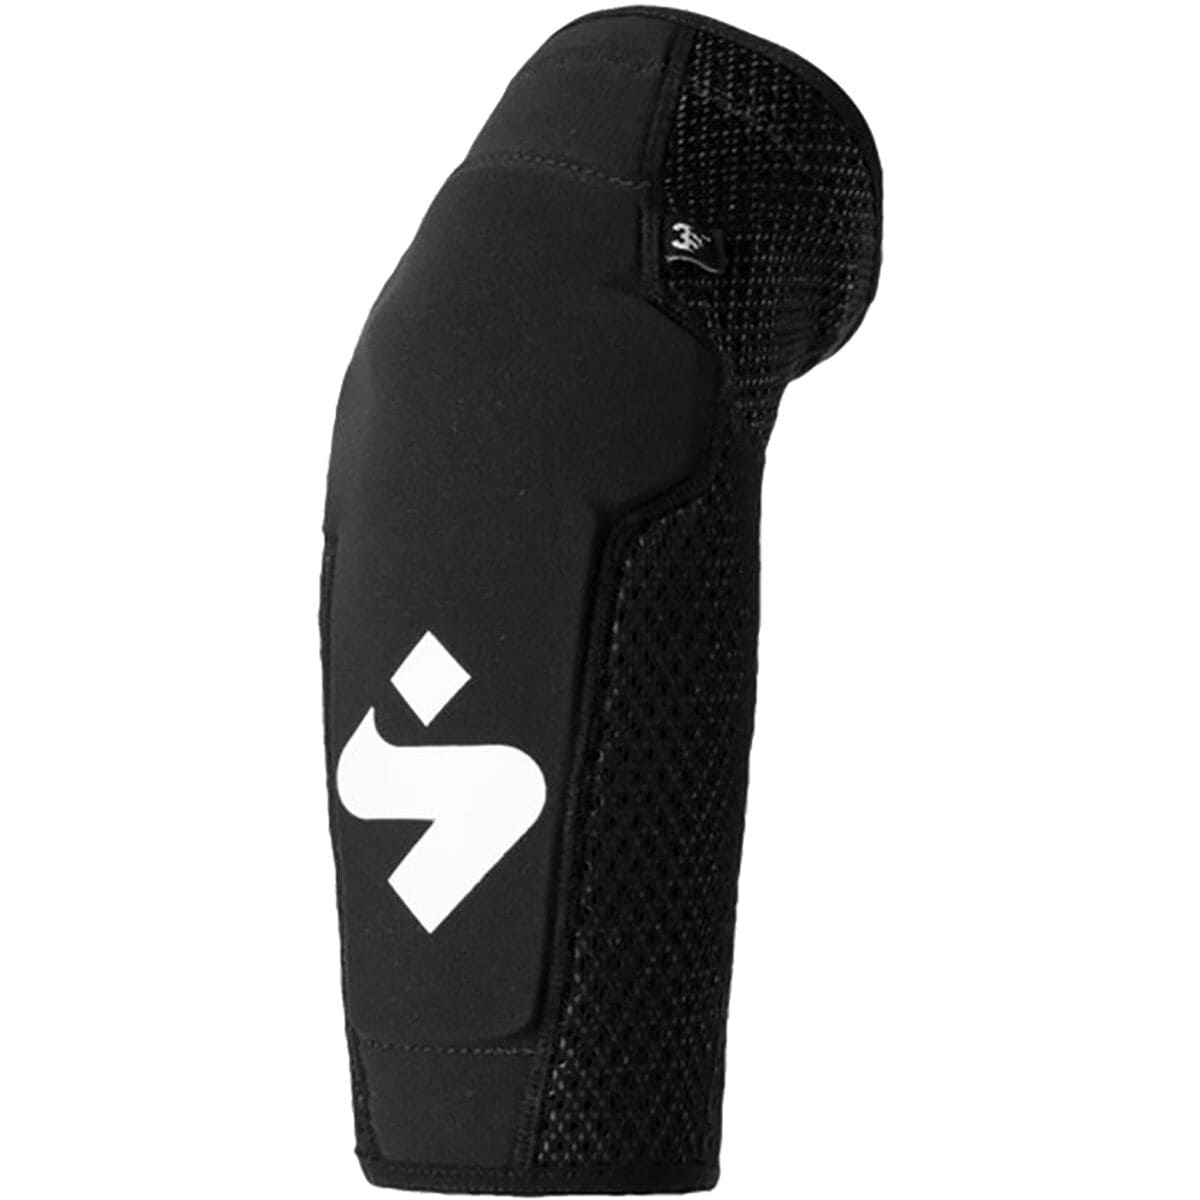 Sweet Protection Knee Guards - Light Black, S